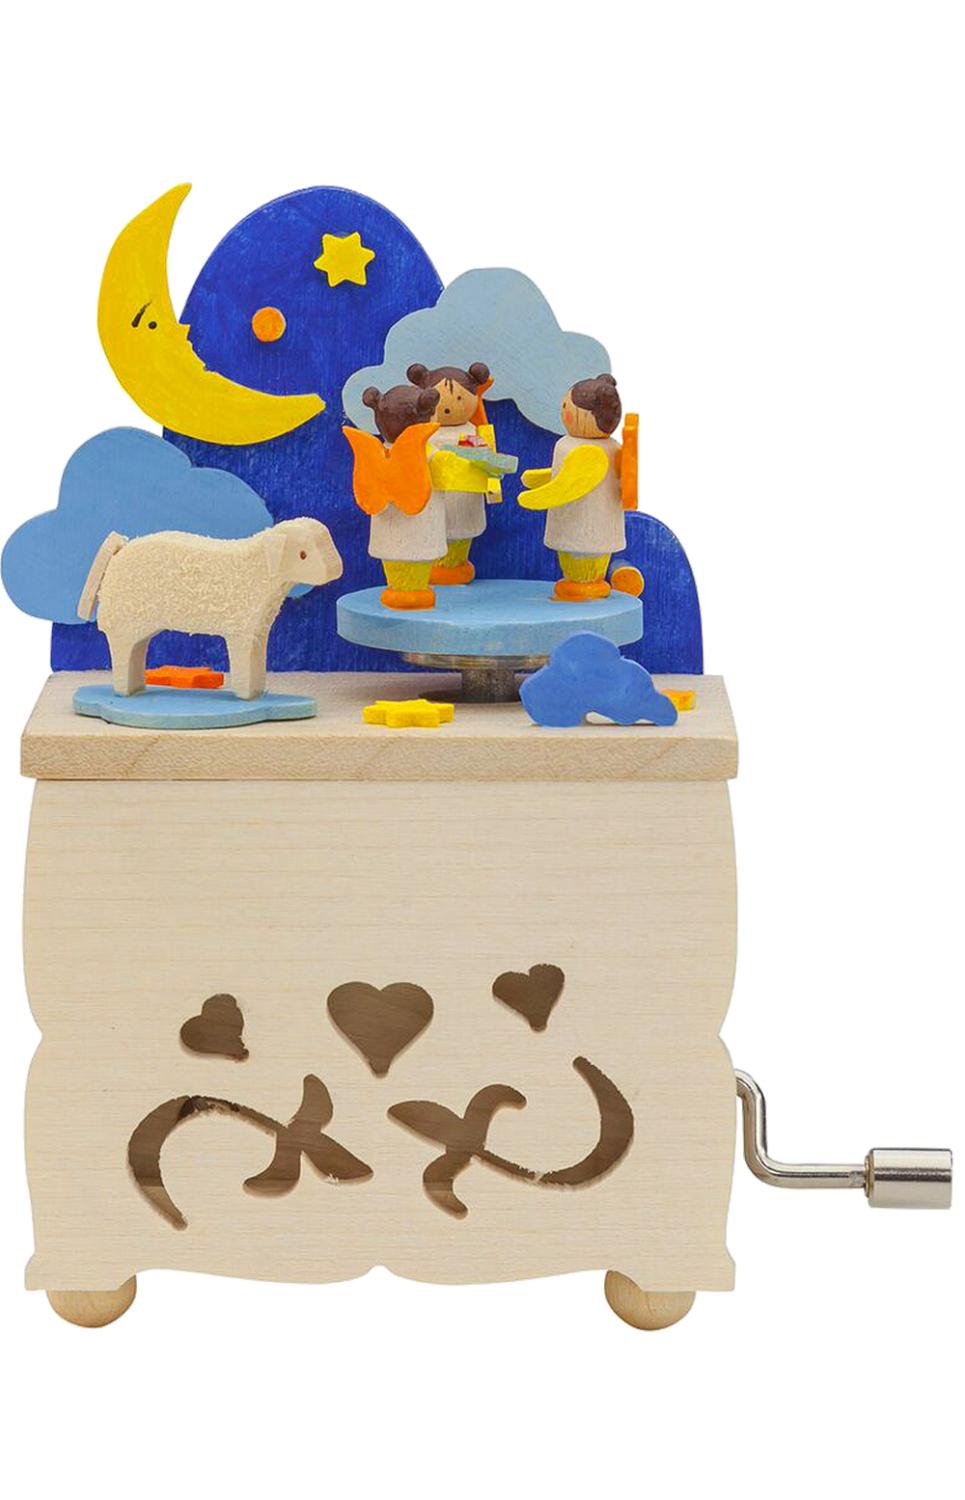 Graupner Music Box - Angels with Toys - Handcrank                                                                                                                                                       